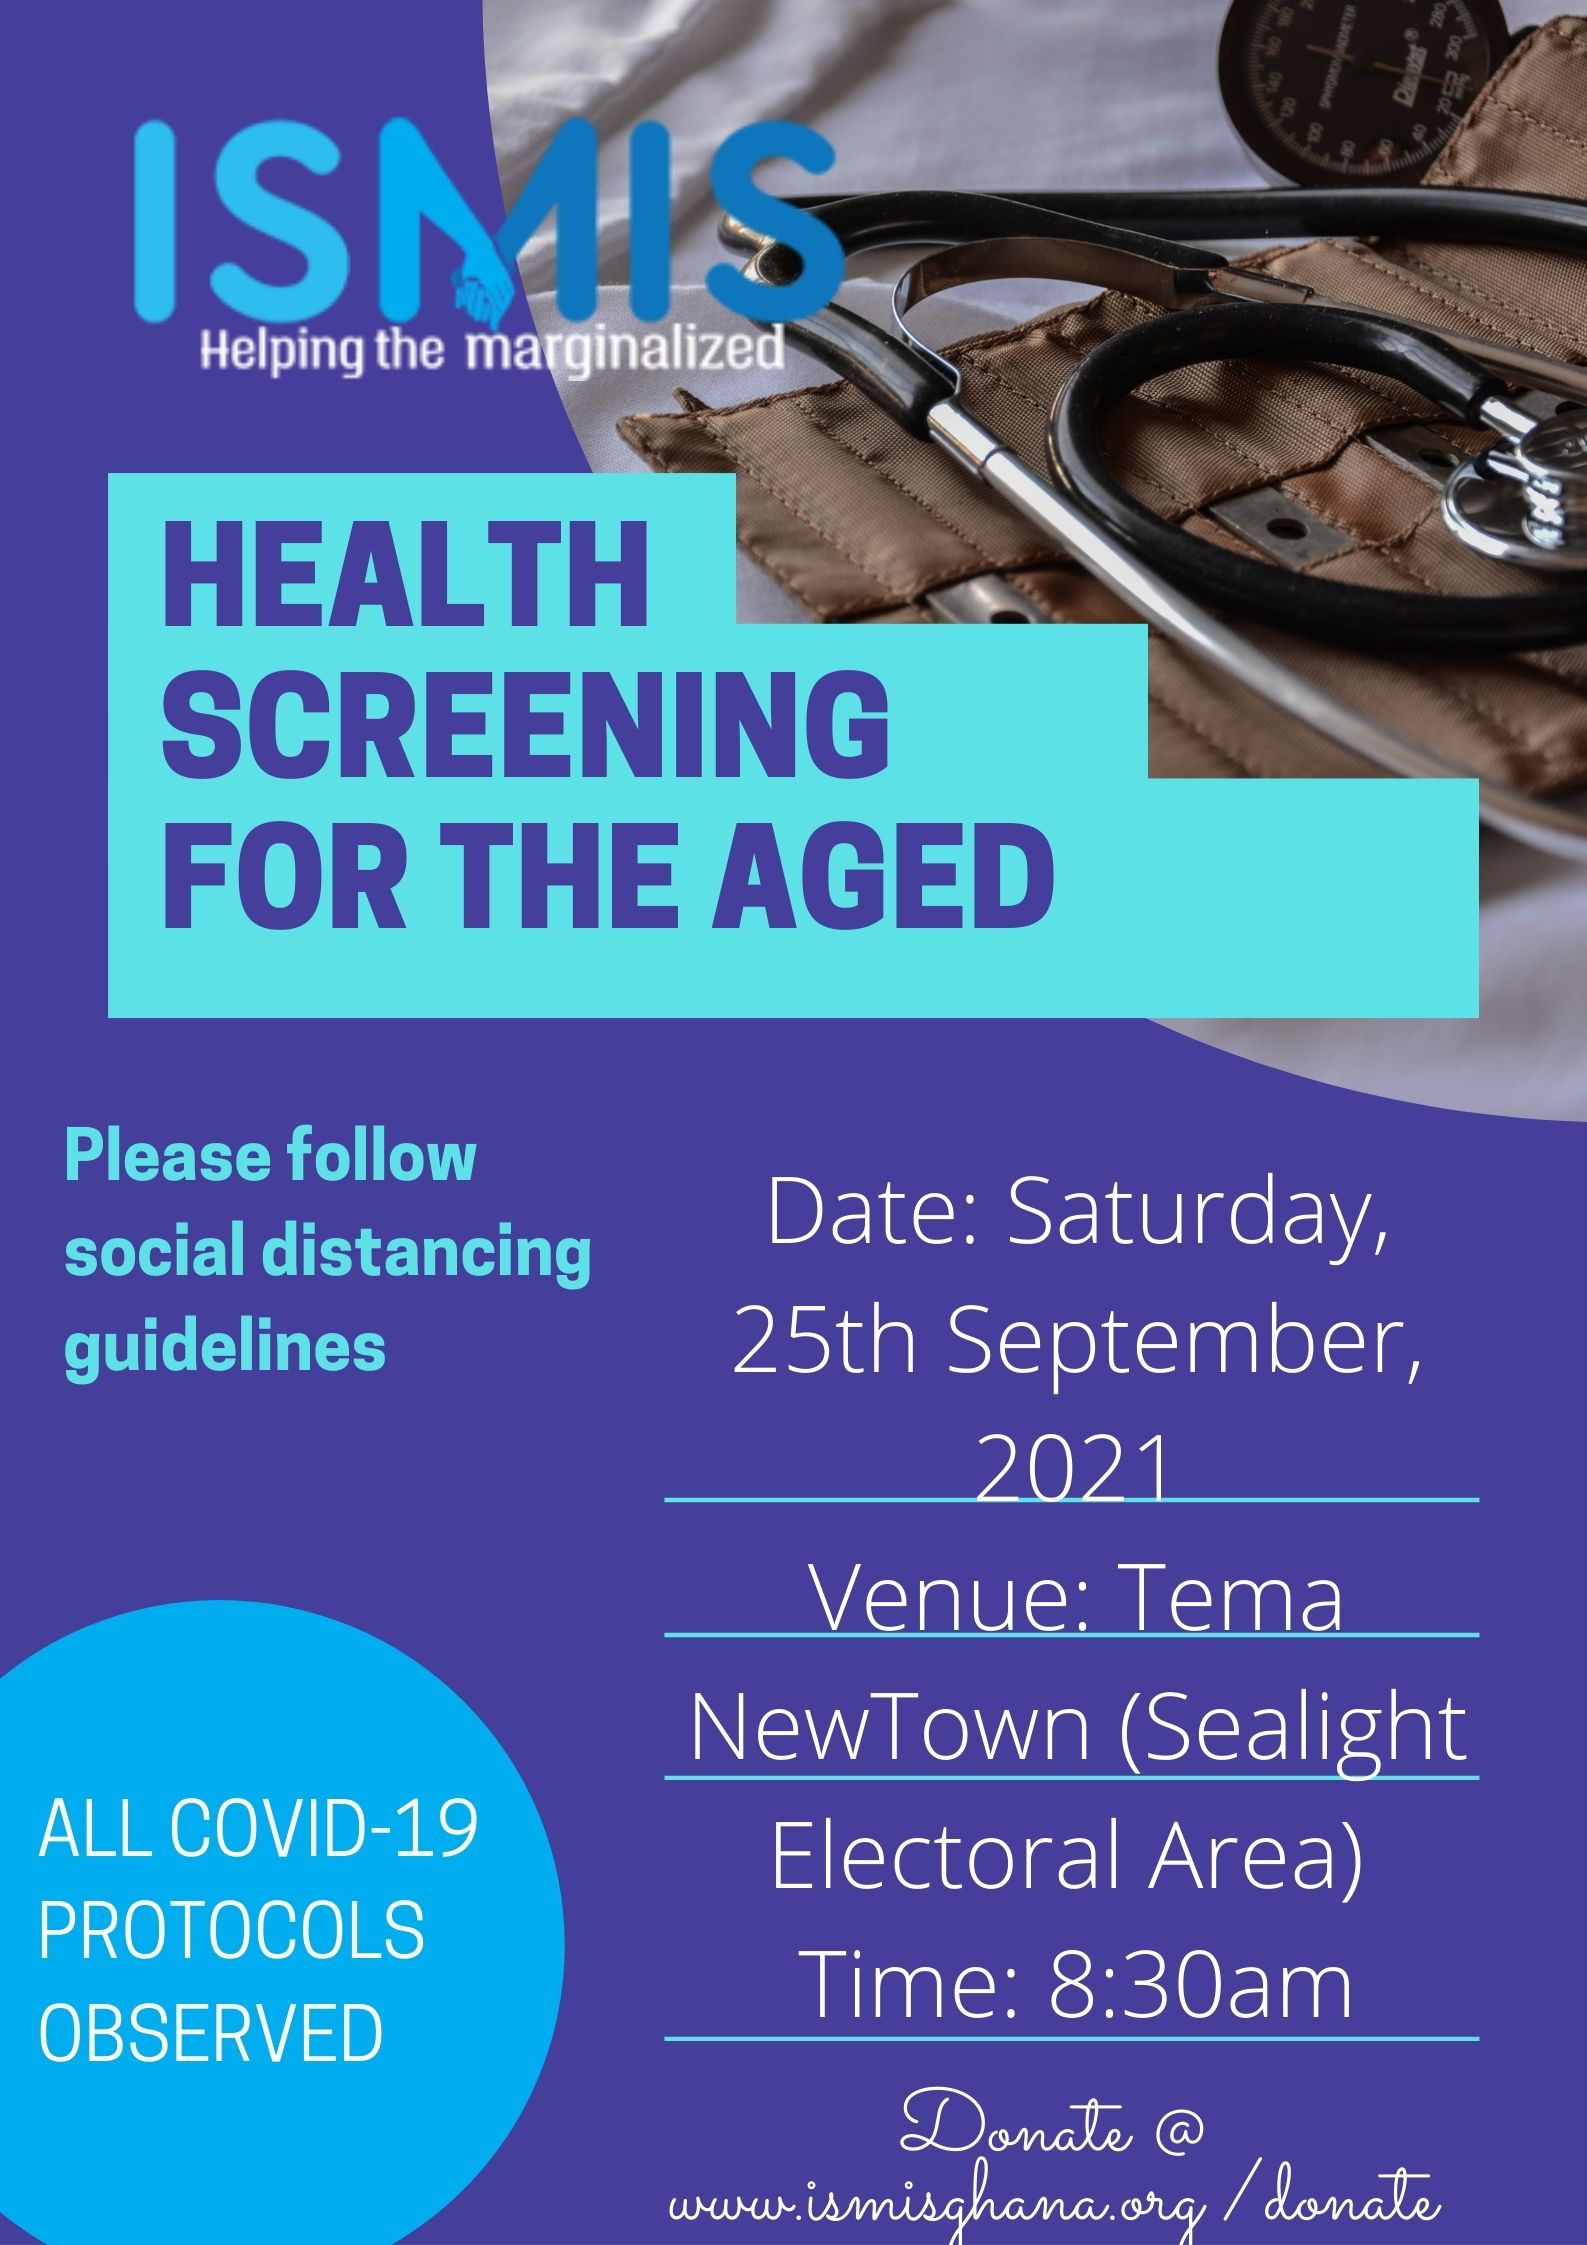 Next Health Screening for the Aged: